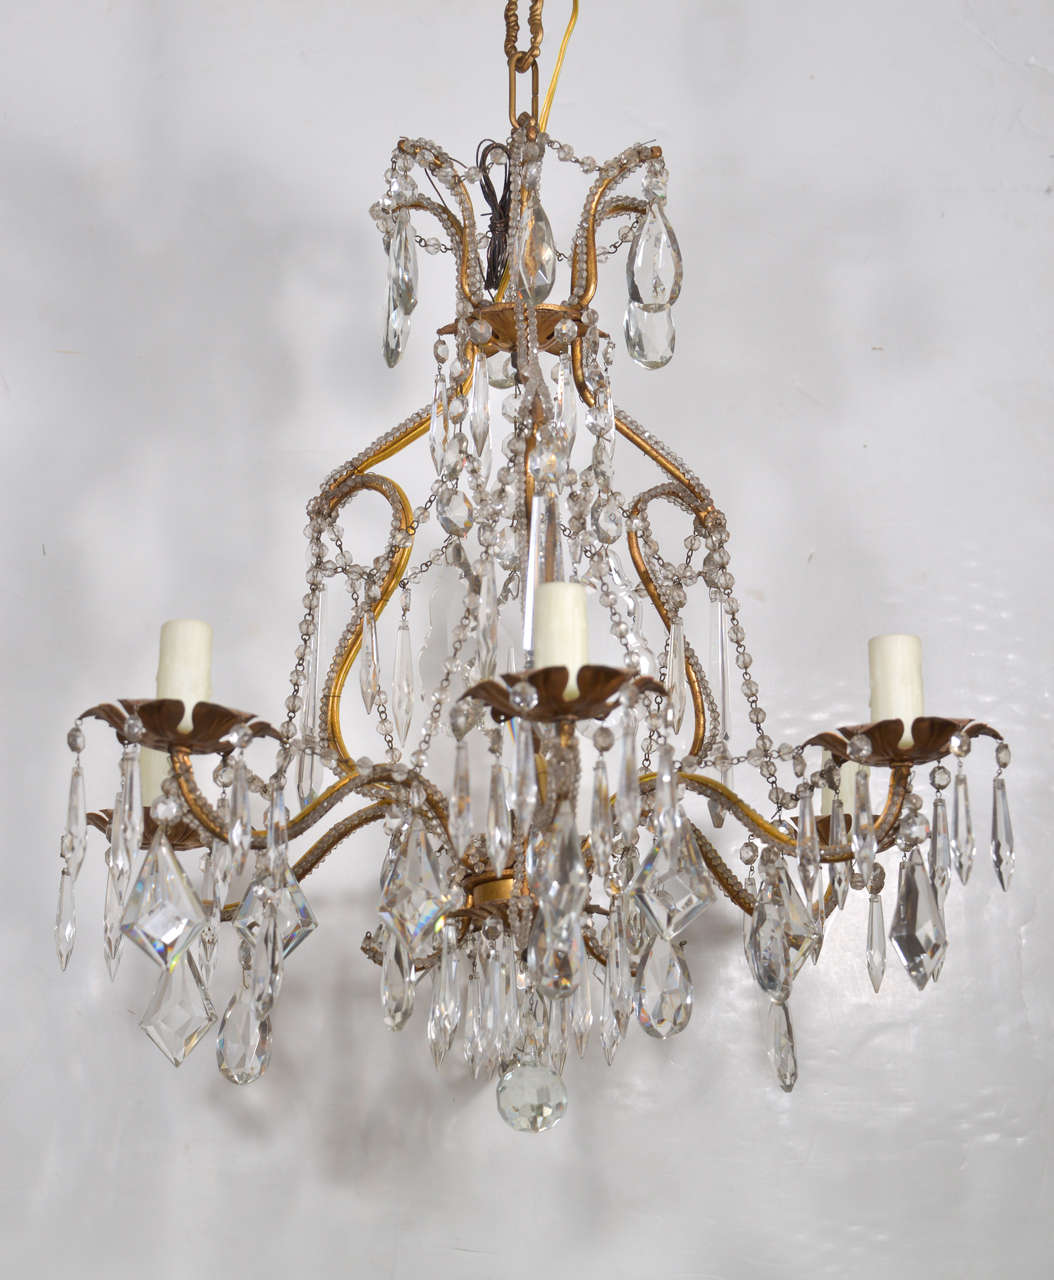 19th century rewired six-arm Venetian crystal chandelier. Delicate beading on the arms.